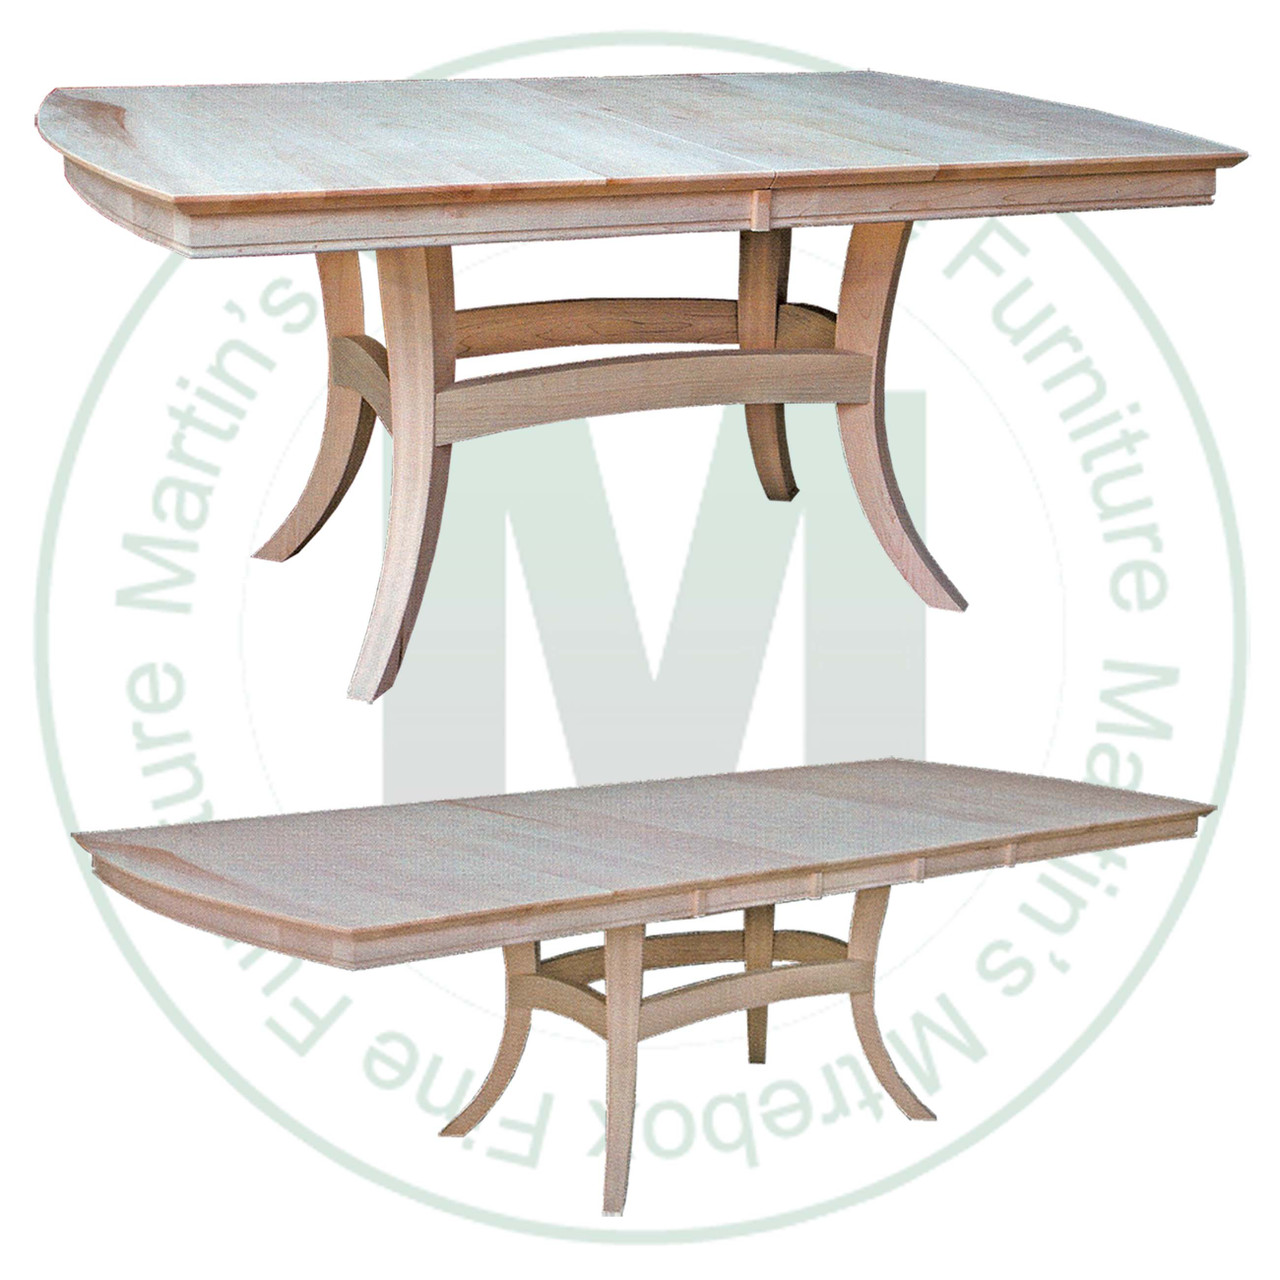 Maple Tokyo Double Pedestal Table 54''D x 72''W x 30''H With 2 - 12'' Leaves